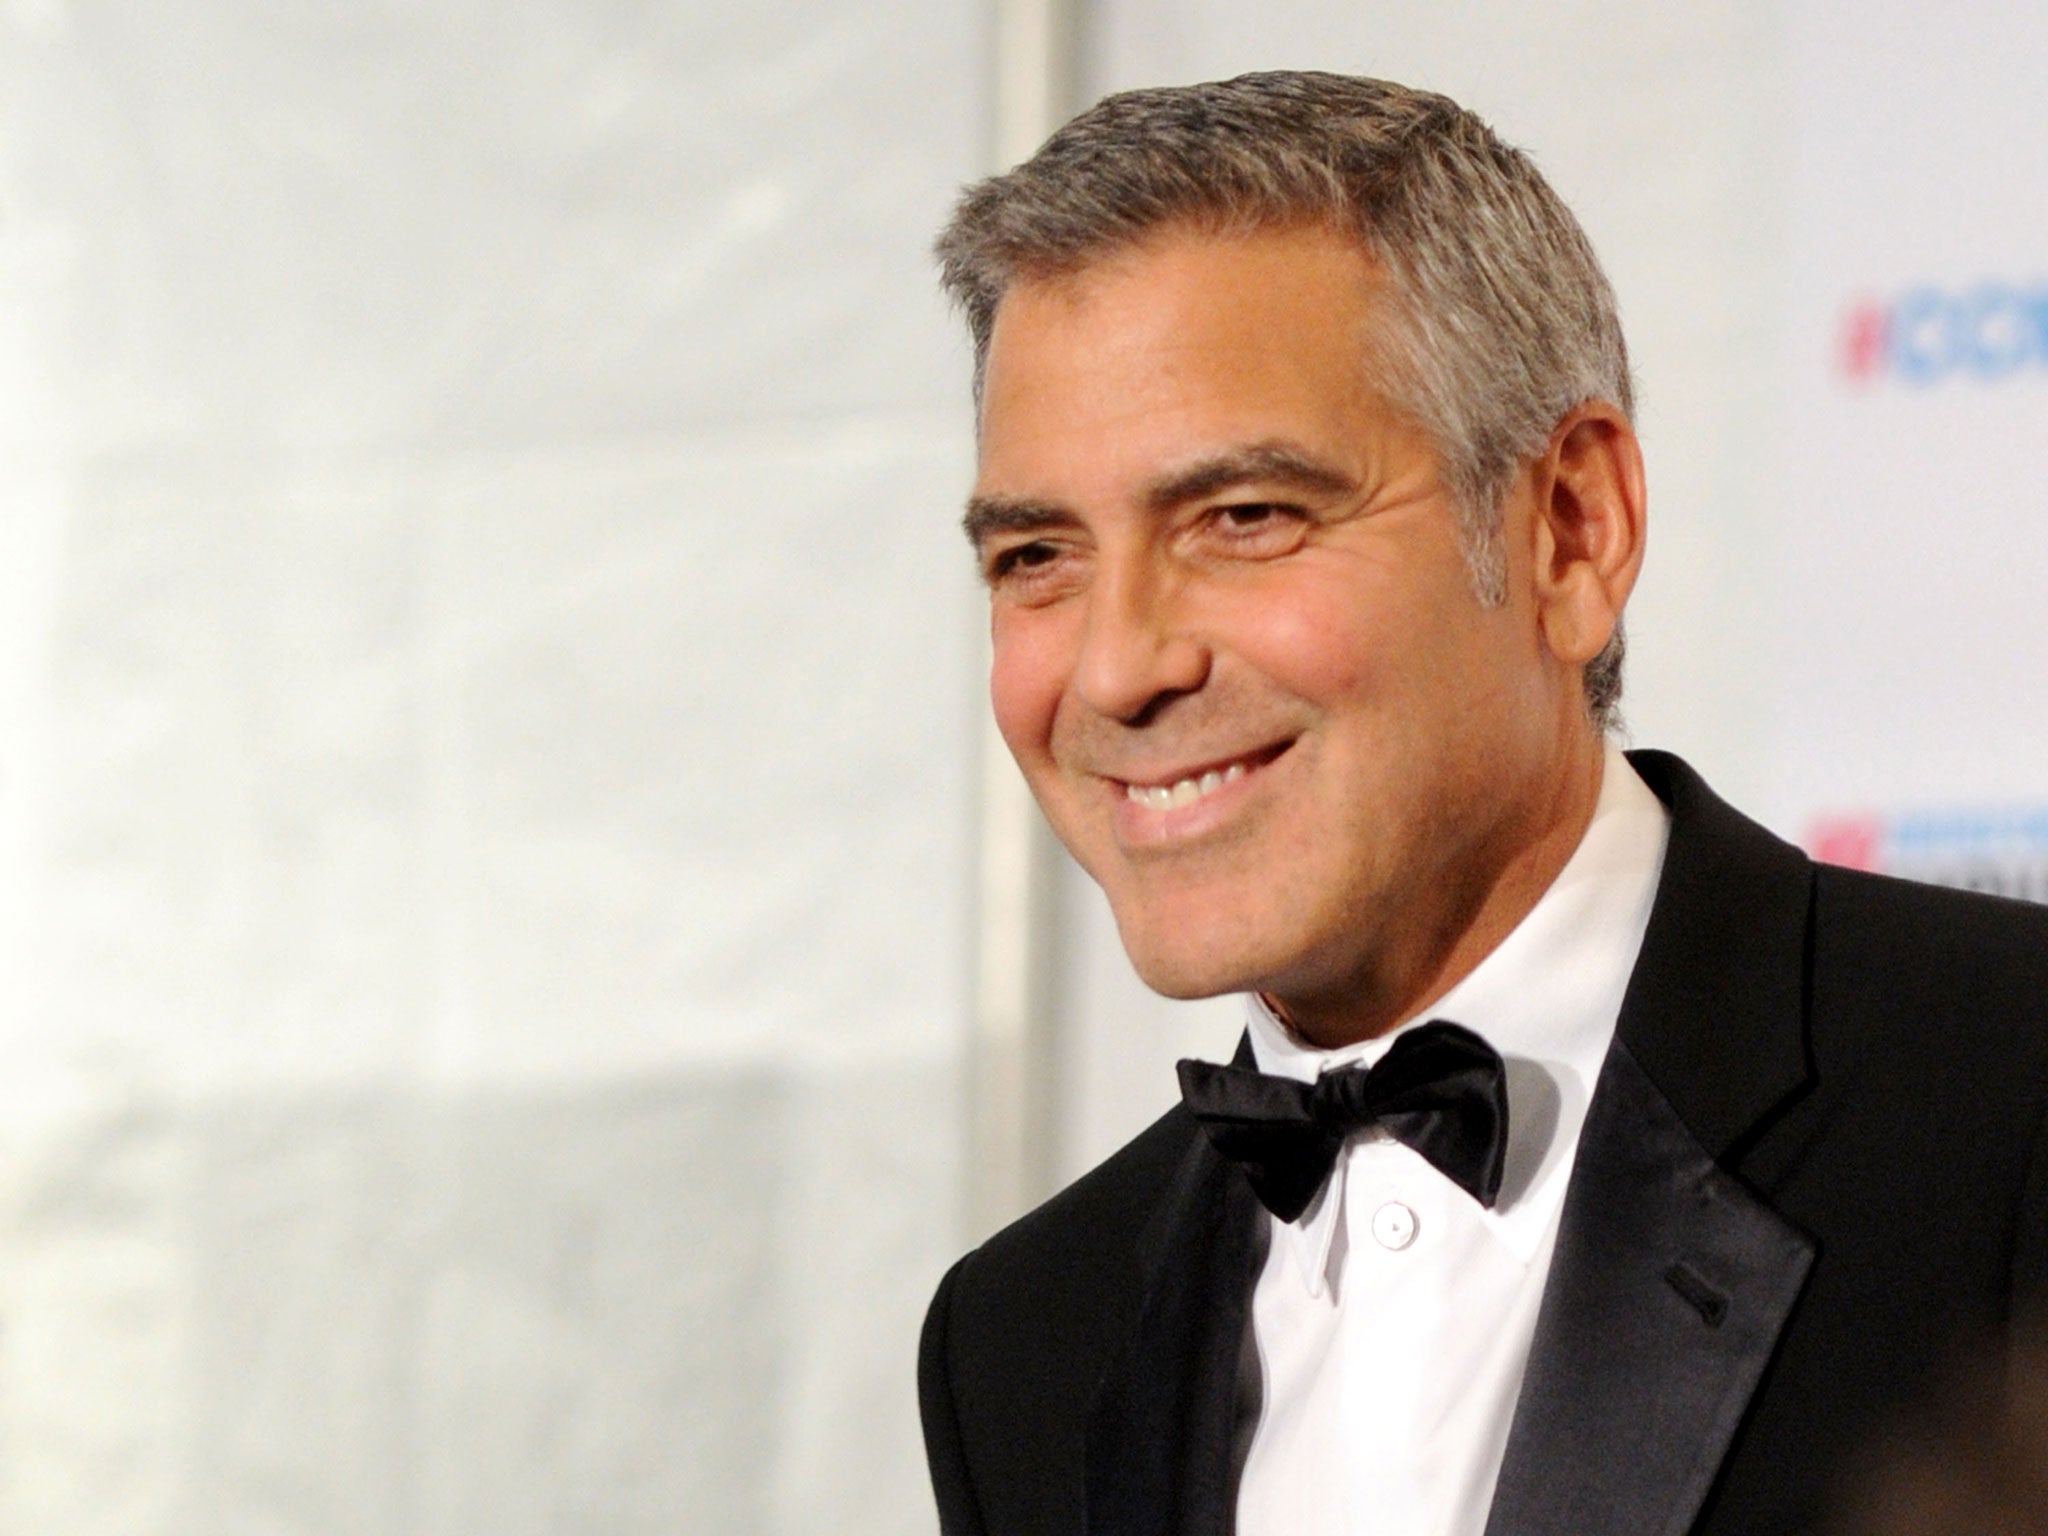 George Clooney has won two Oscars and three Golden Globe Awards